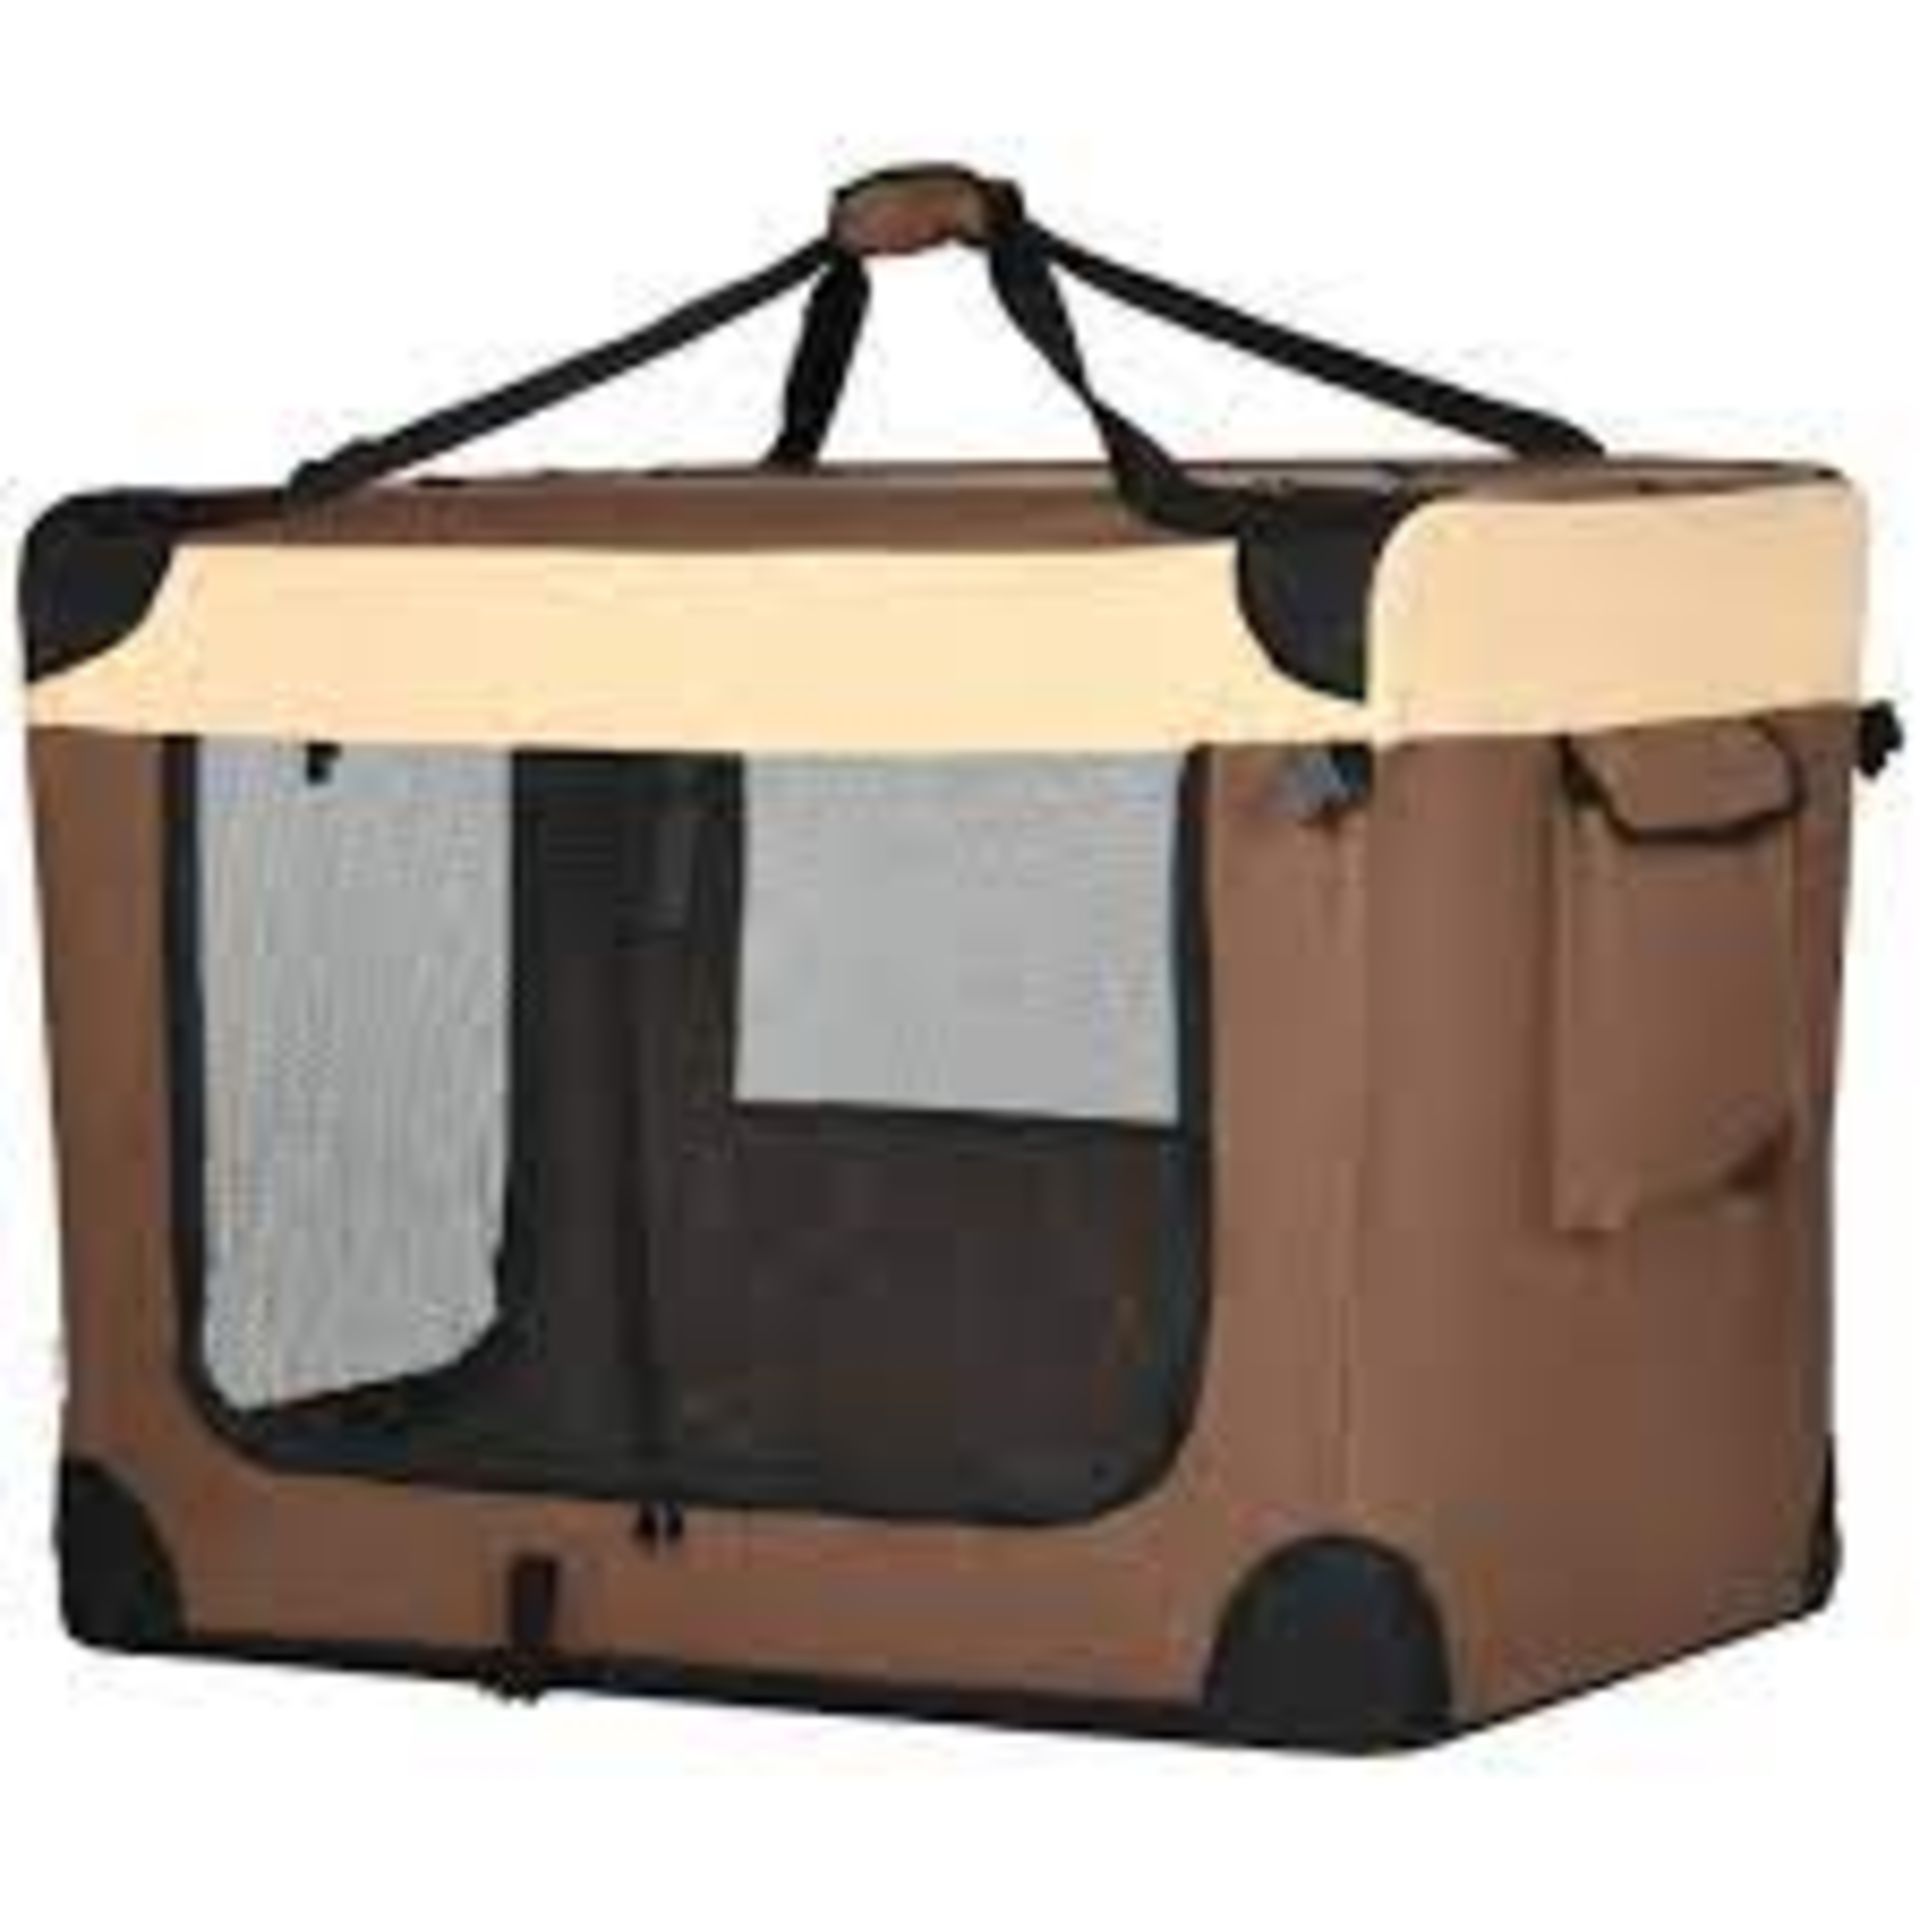 PawHut 91cm Foldable Pet Carrier, with Cushion, for Medium Dogs and Cats - Brown - SR4